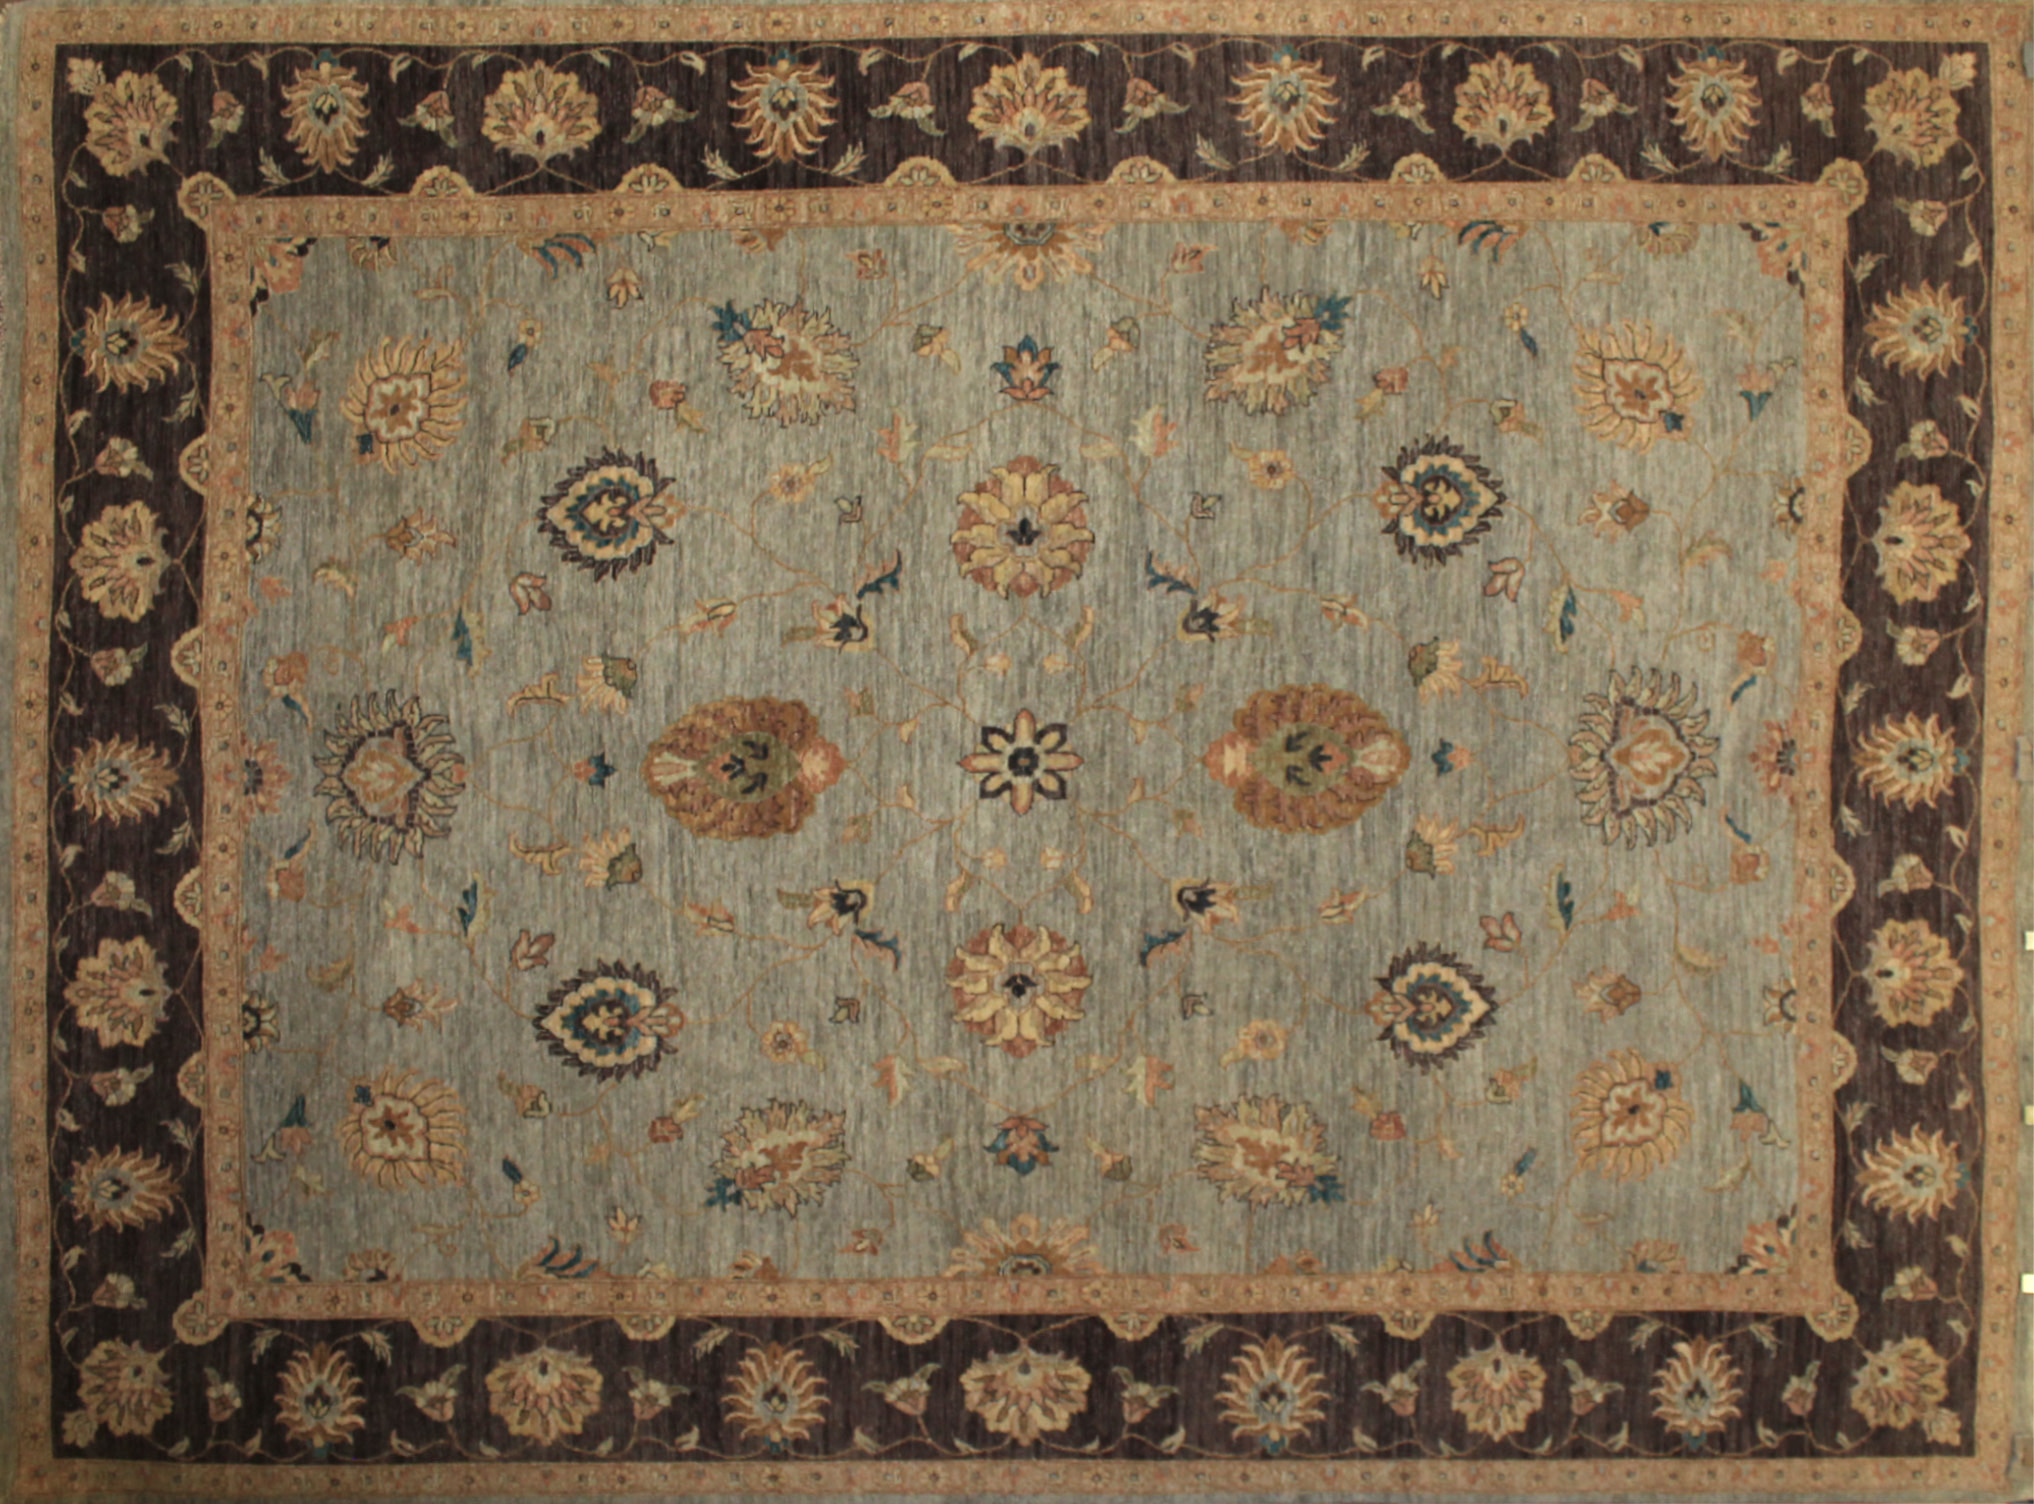 Clearance & Discount Rugs Traditional Hand Knotted 5263 Lt. Blue - Blue & Lt. Brown - Chocolate Hand Knotted Rug